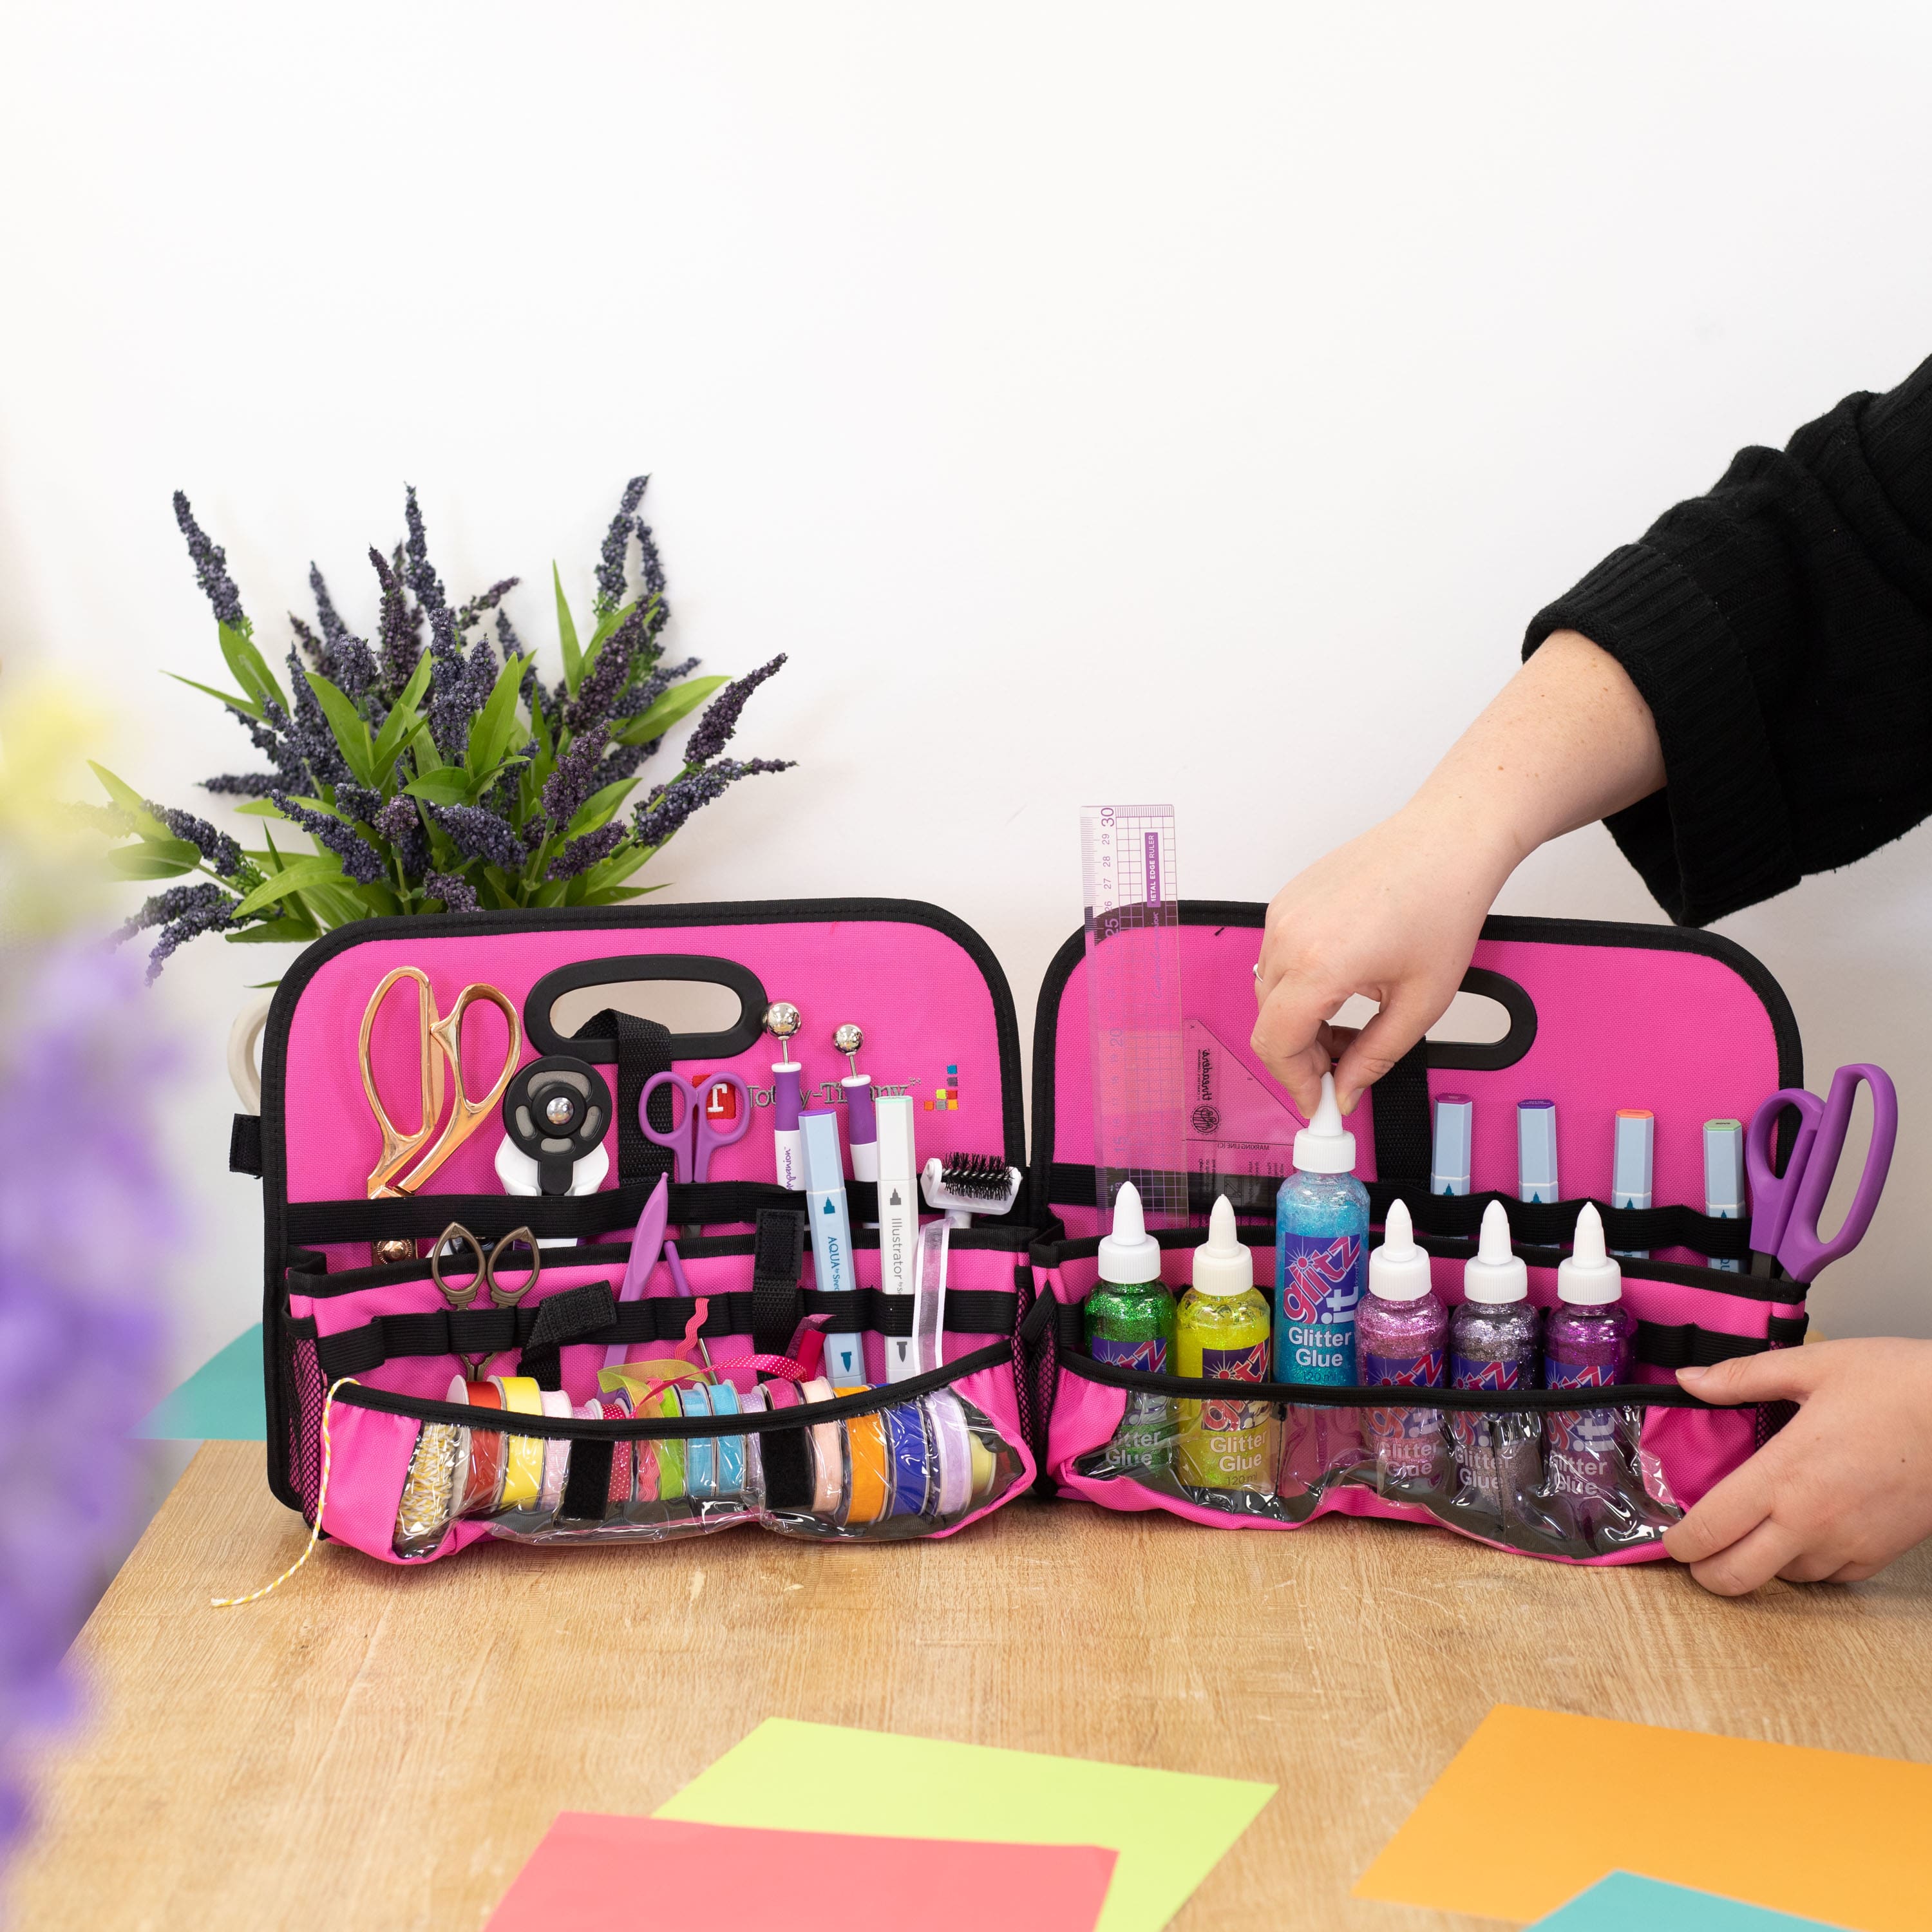 Totally-Tiffany&#x2122; The Ditto Double Duty Desktop Tool Organizer &#x26; Tote